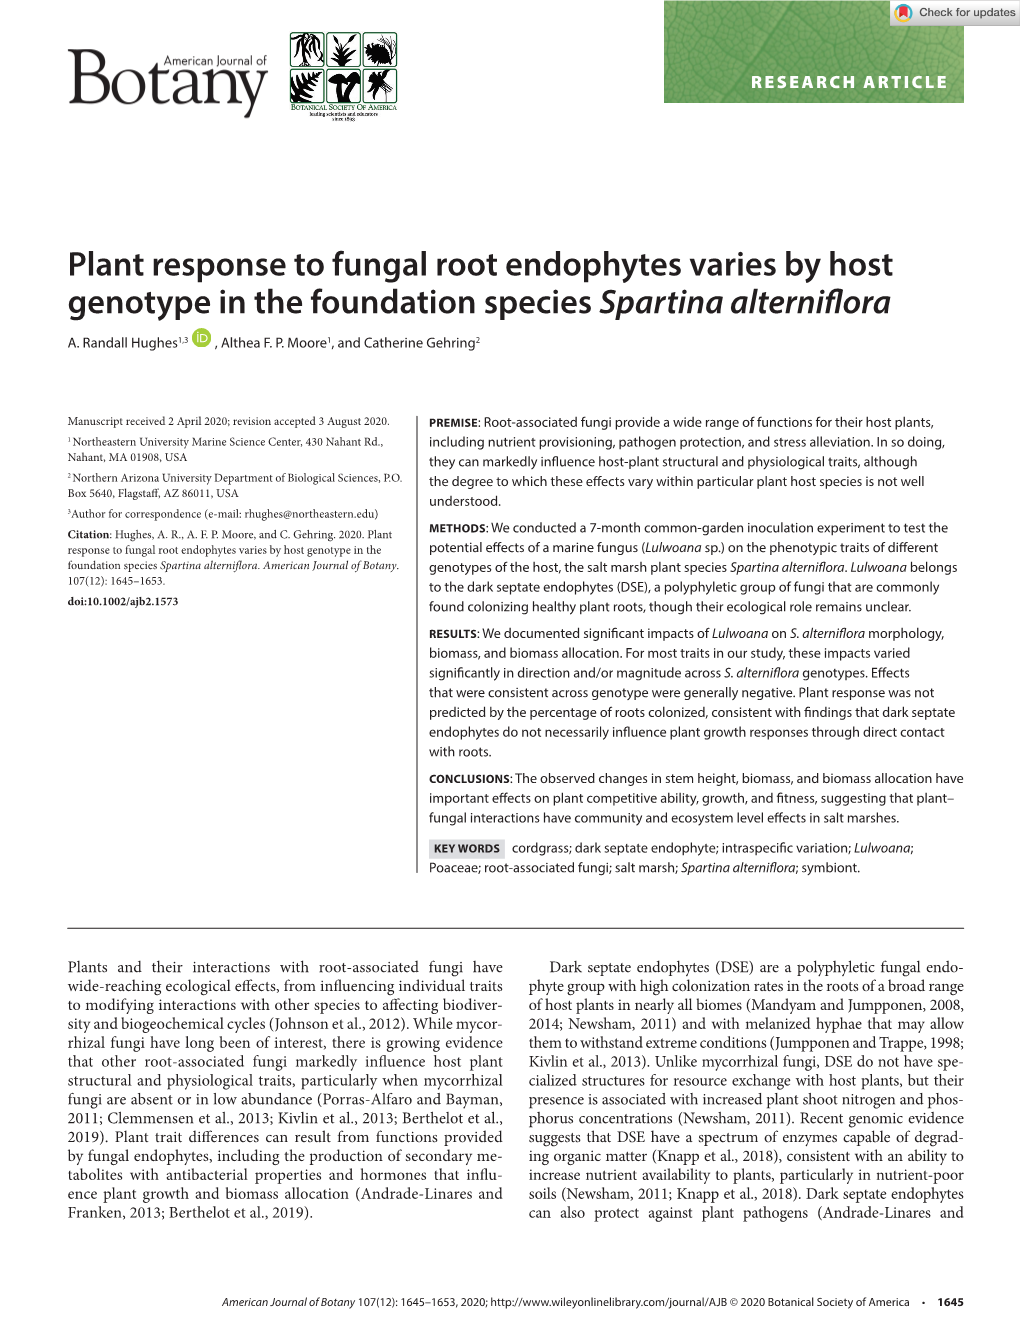 Plant Response to Fungal Root Endophytes Varies by Host Genotype in the Foundation Species Spartina Alterniflora